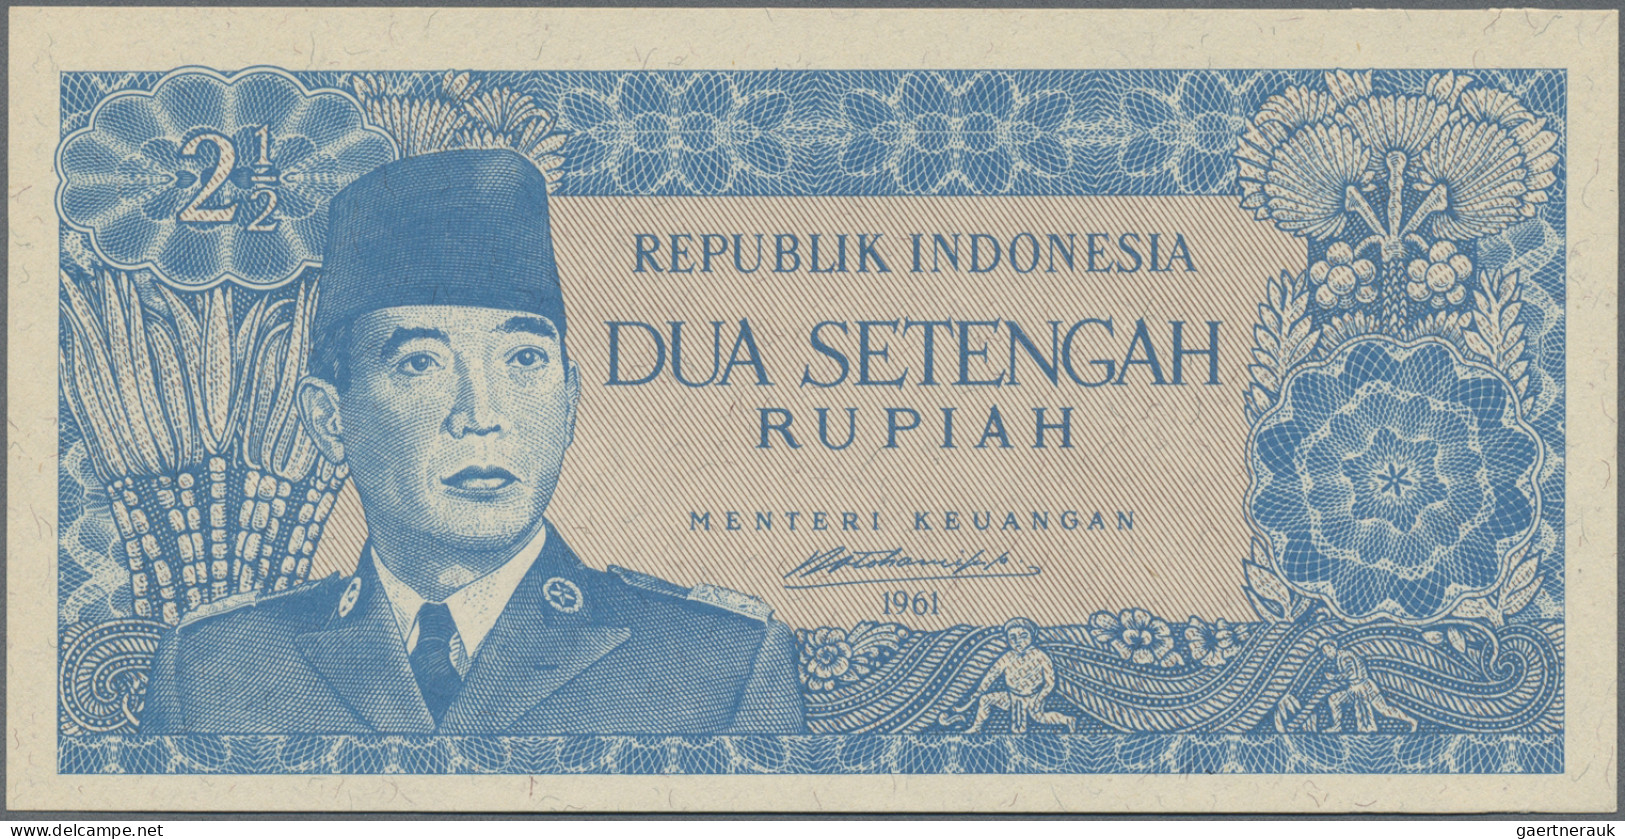 Indonesia: Republic Indonesia, huge lot with 17 banknotes 1 and 2.5 Rupiah, seri